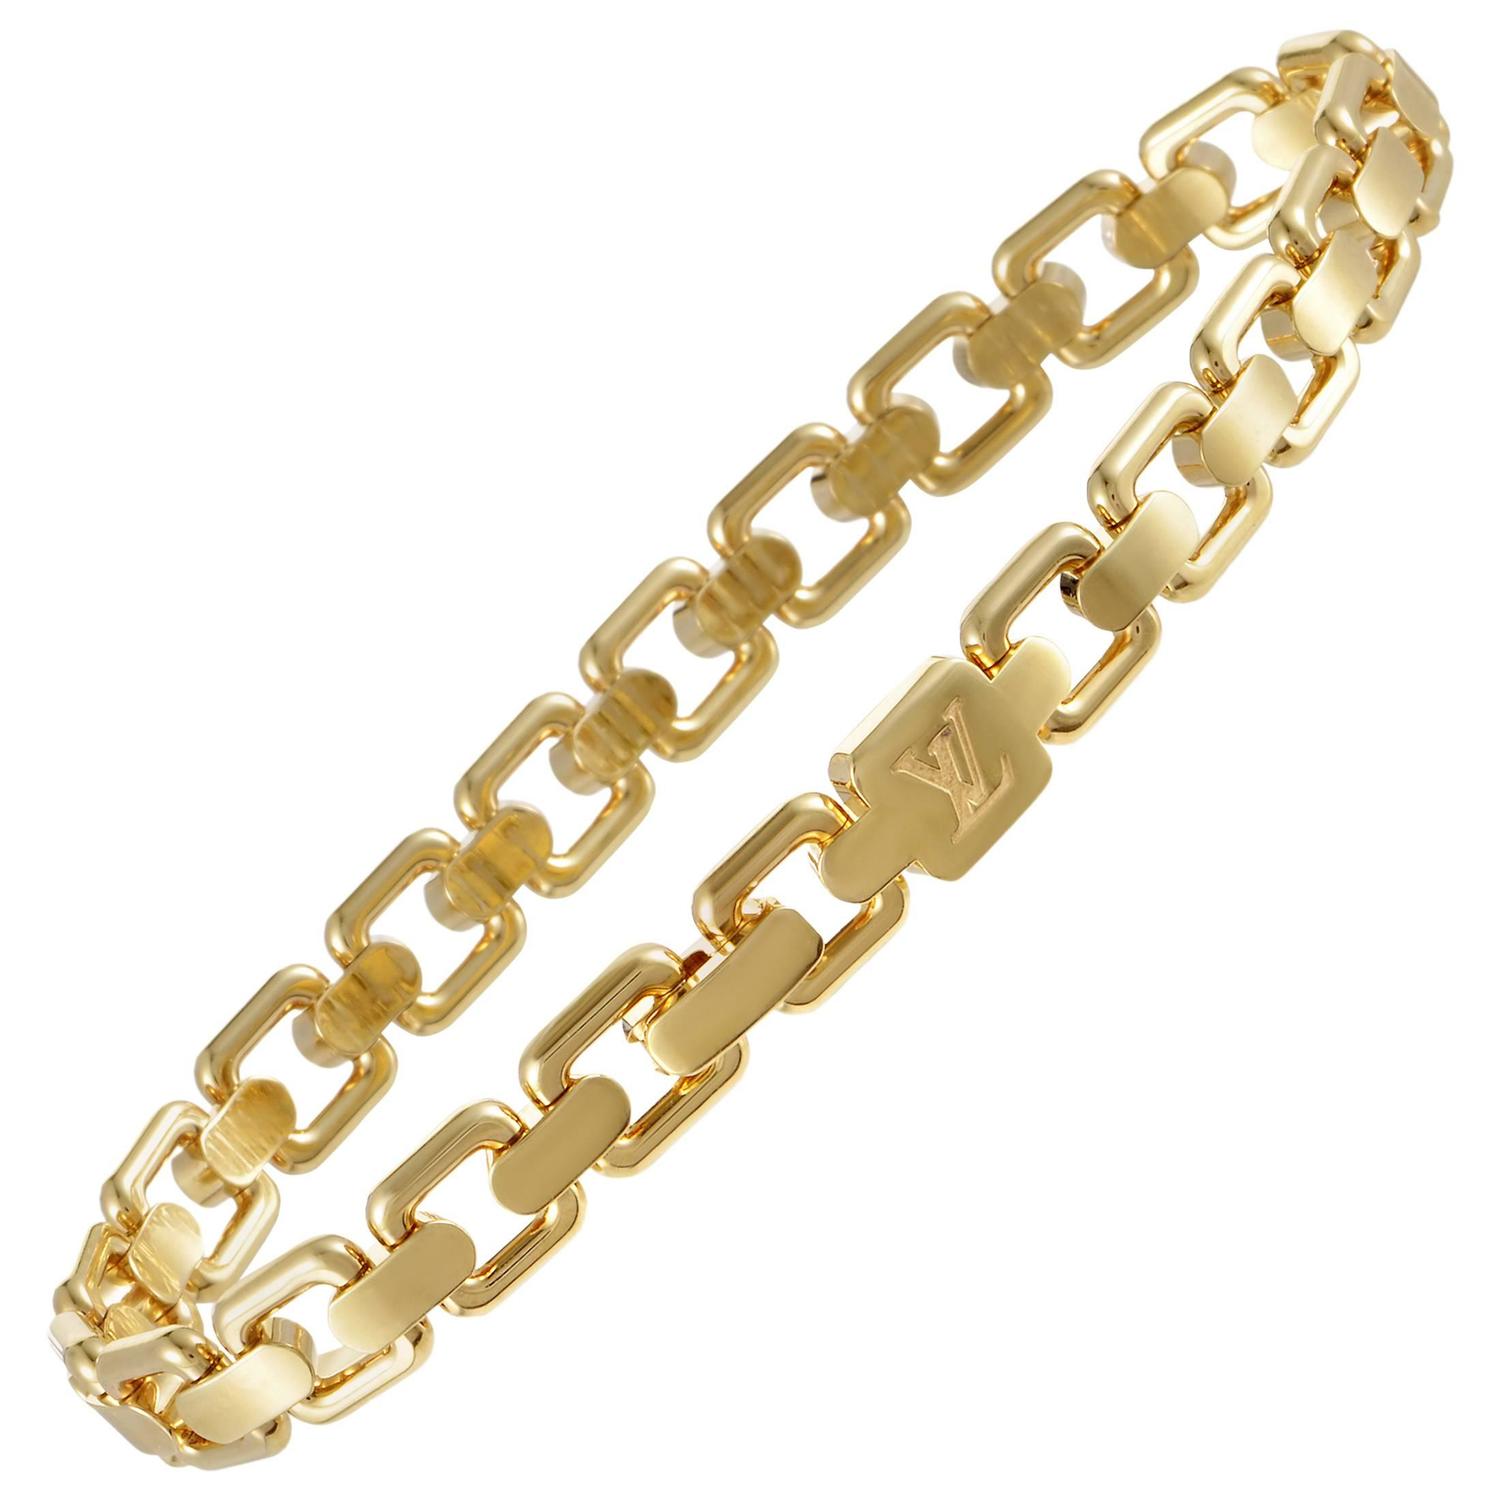 Louis Vuitton Yellow Gold Chain Link Bracelet For Sale at 1stdibs